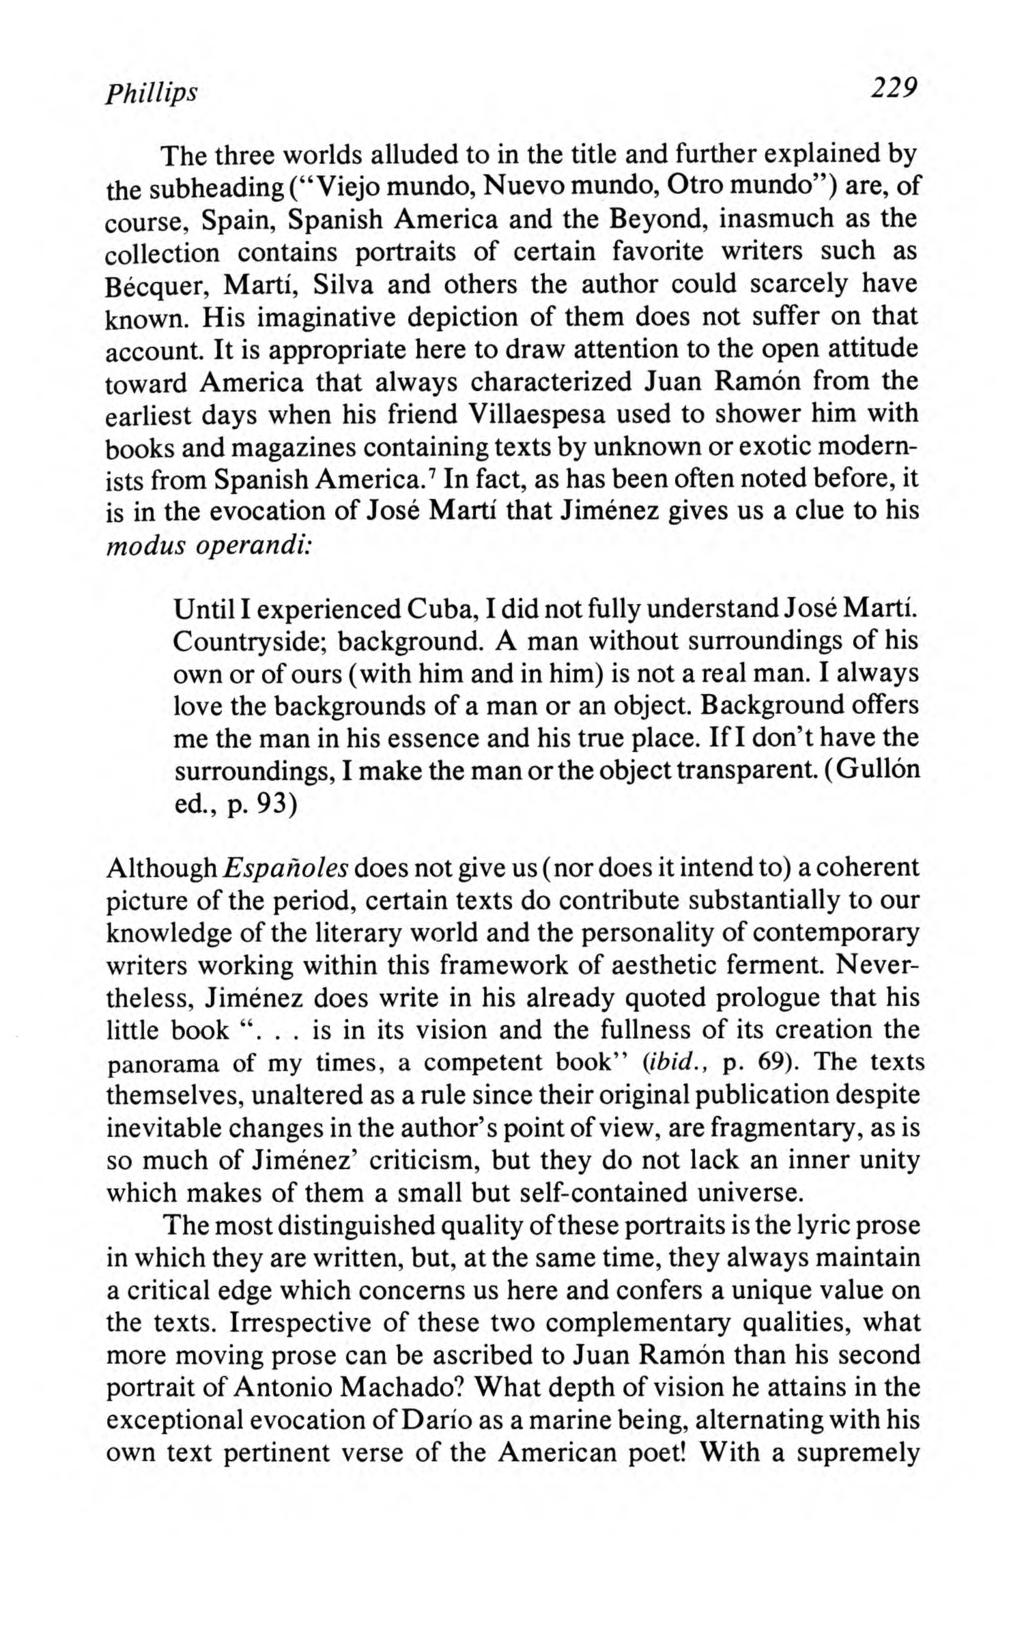 Phillips: The Literary Criticism and Memoirs of Juan Ramón Jiménez Phillips 229 The three worlds alluded to in the title and further explained by the subheading ("Viejo mundo, Nuevo mundo, Otro